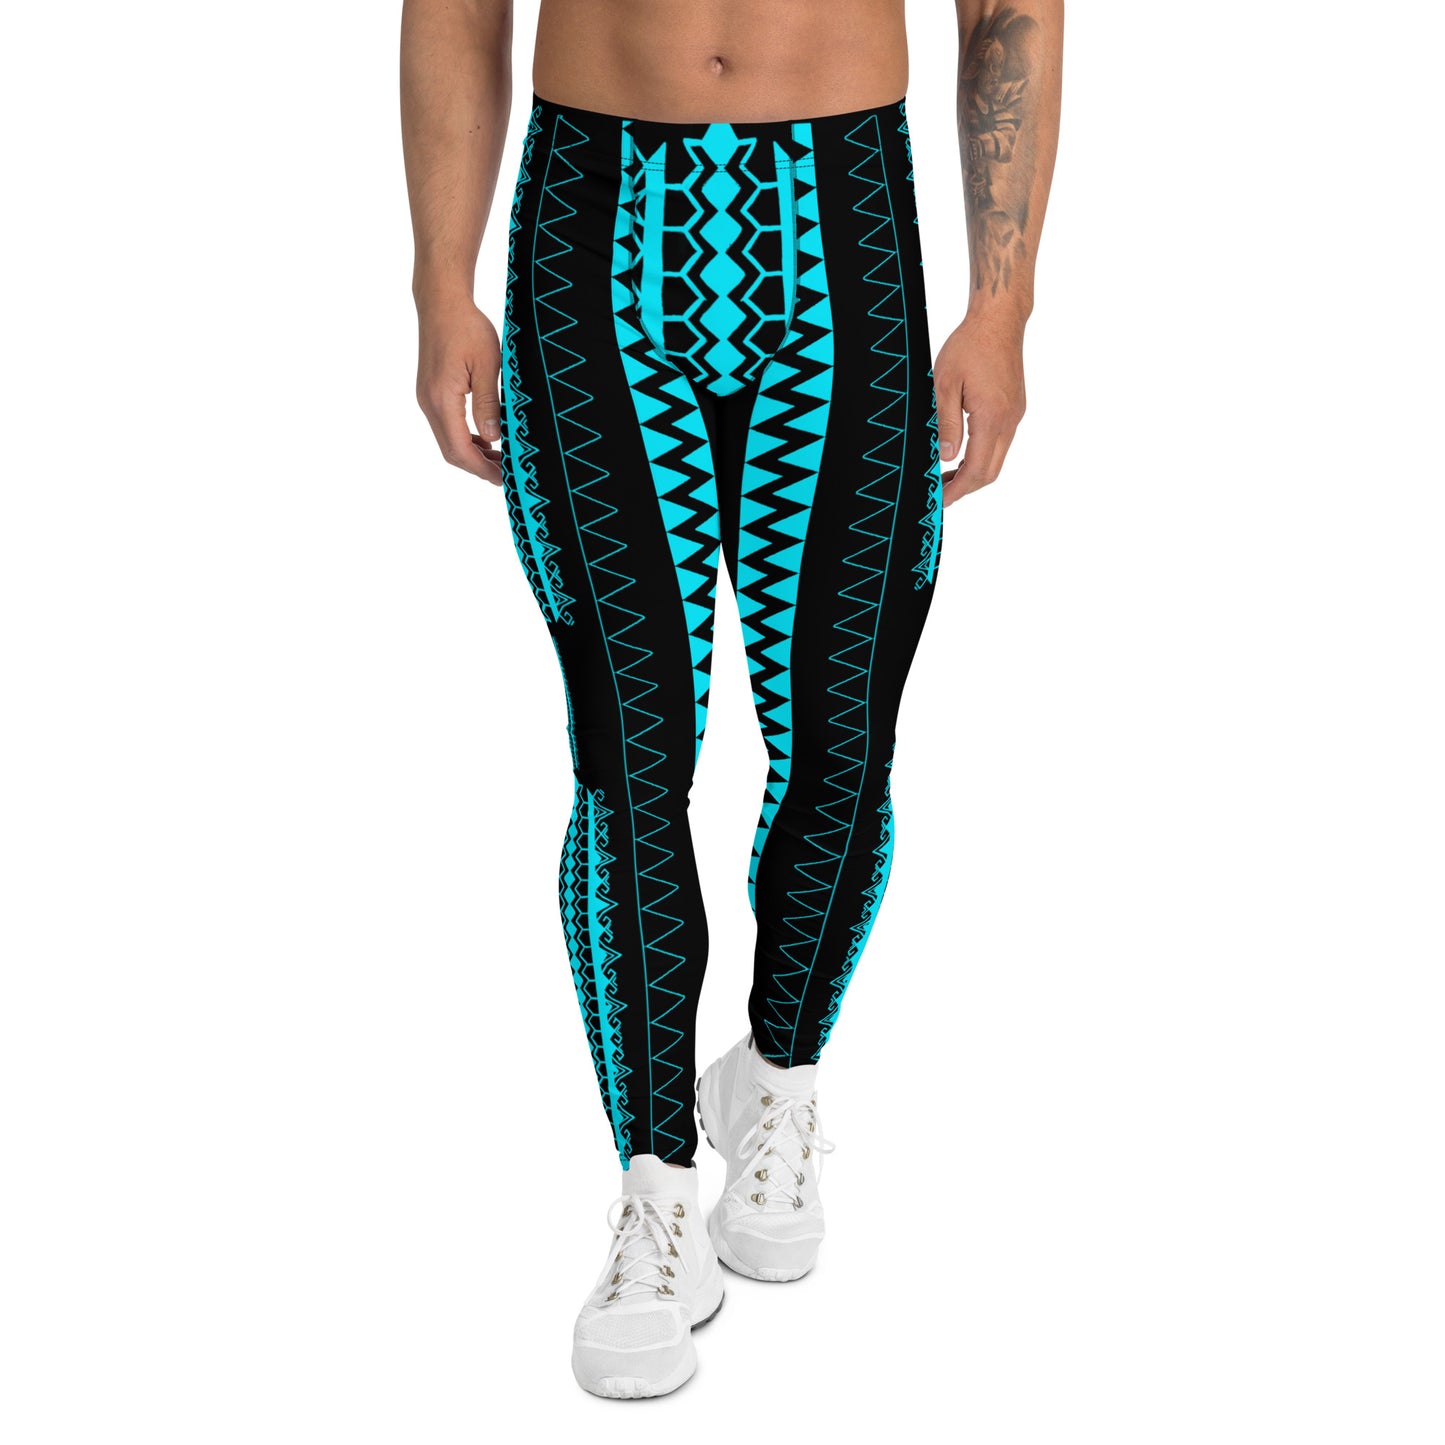 Pintados Leggings Black and Teal "Masculine Size"